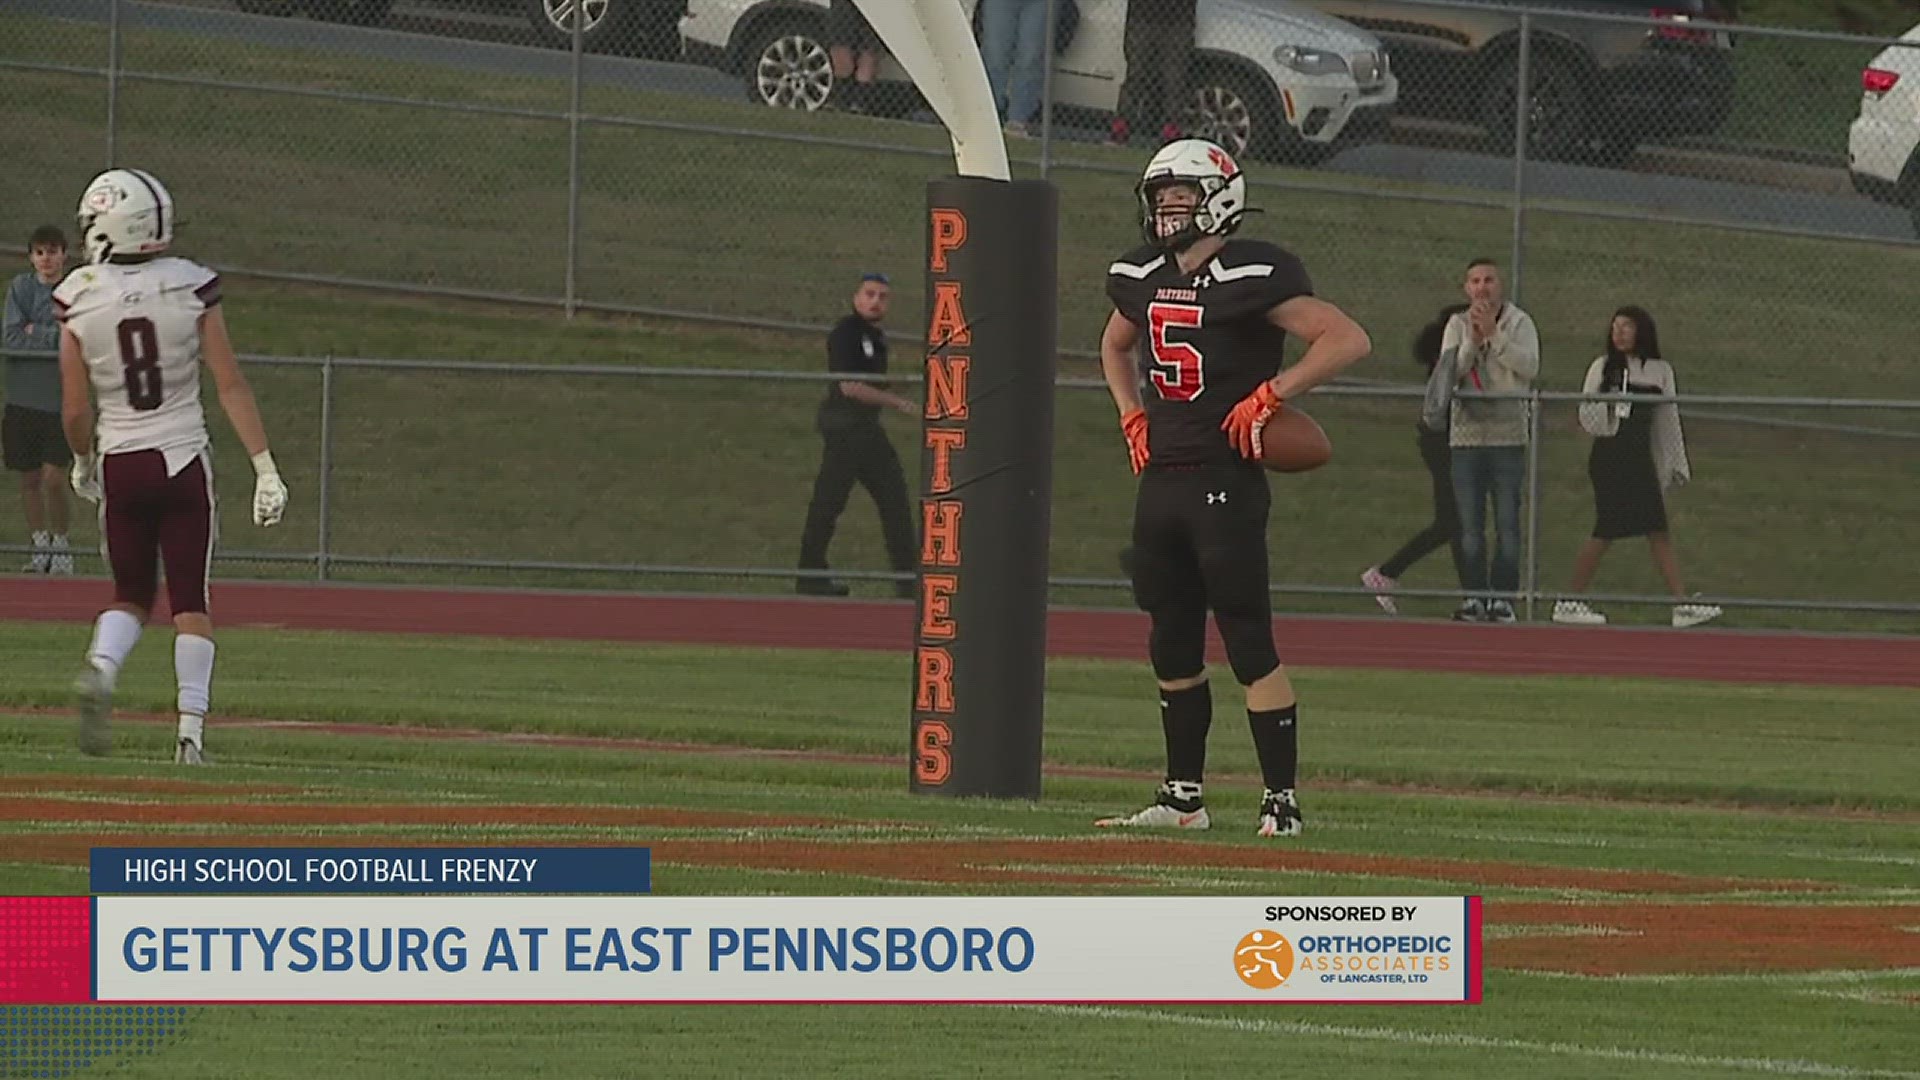 East Pennsboro played their program's 1,000th game and earned the win, while Eastern York is 4-0 for the first time in program history.